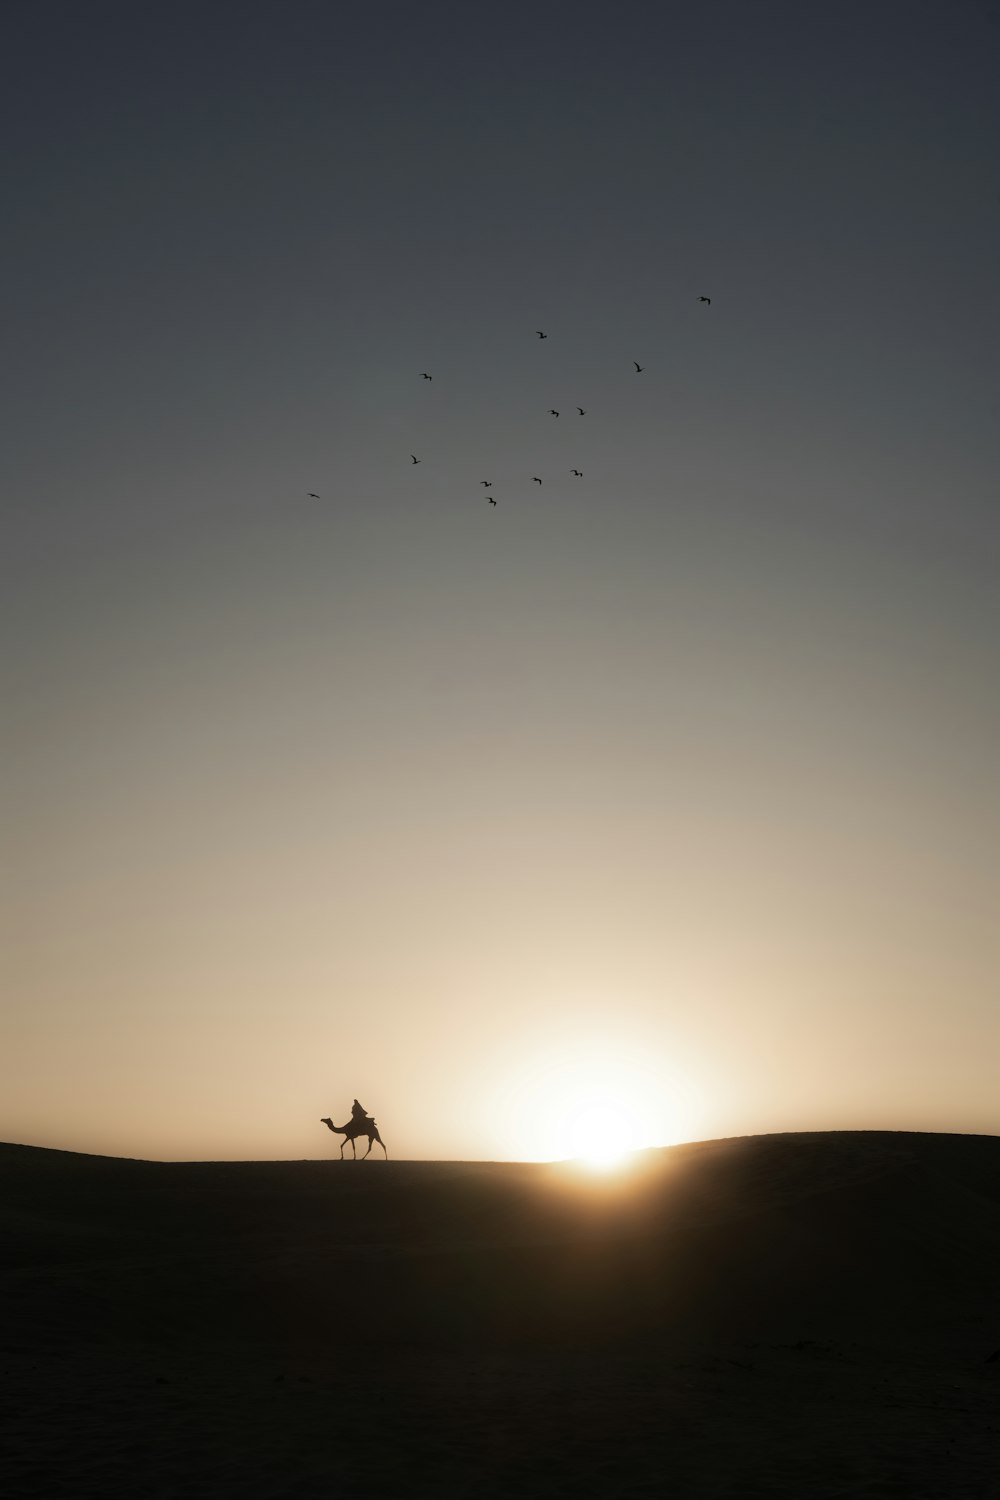 a person riding a horse across a field at sunset